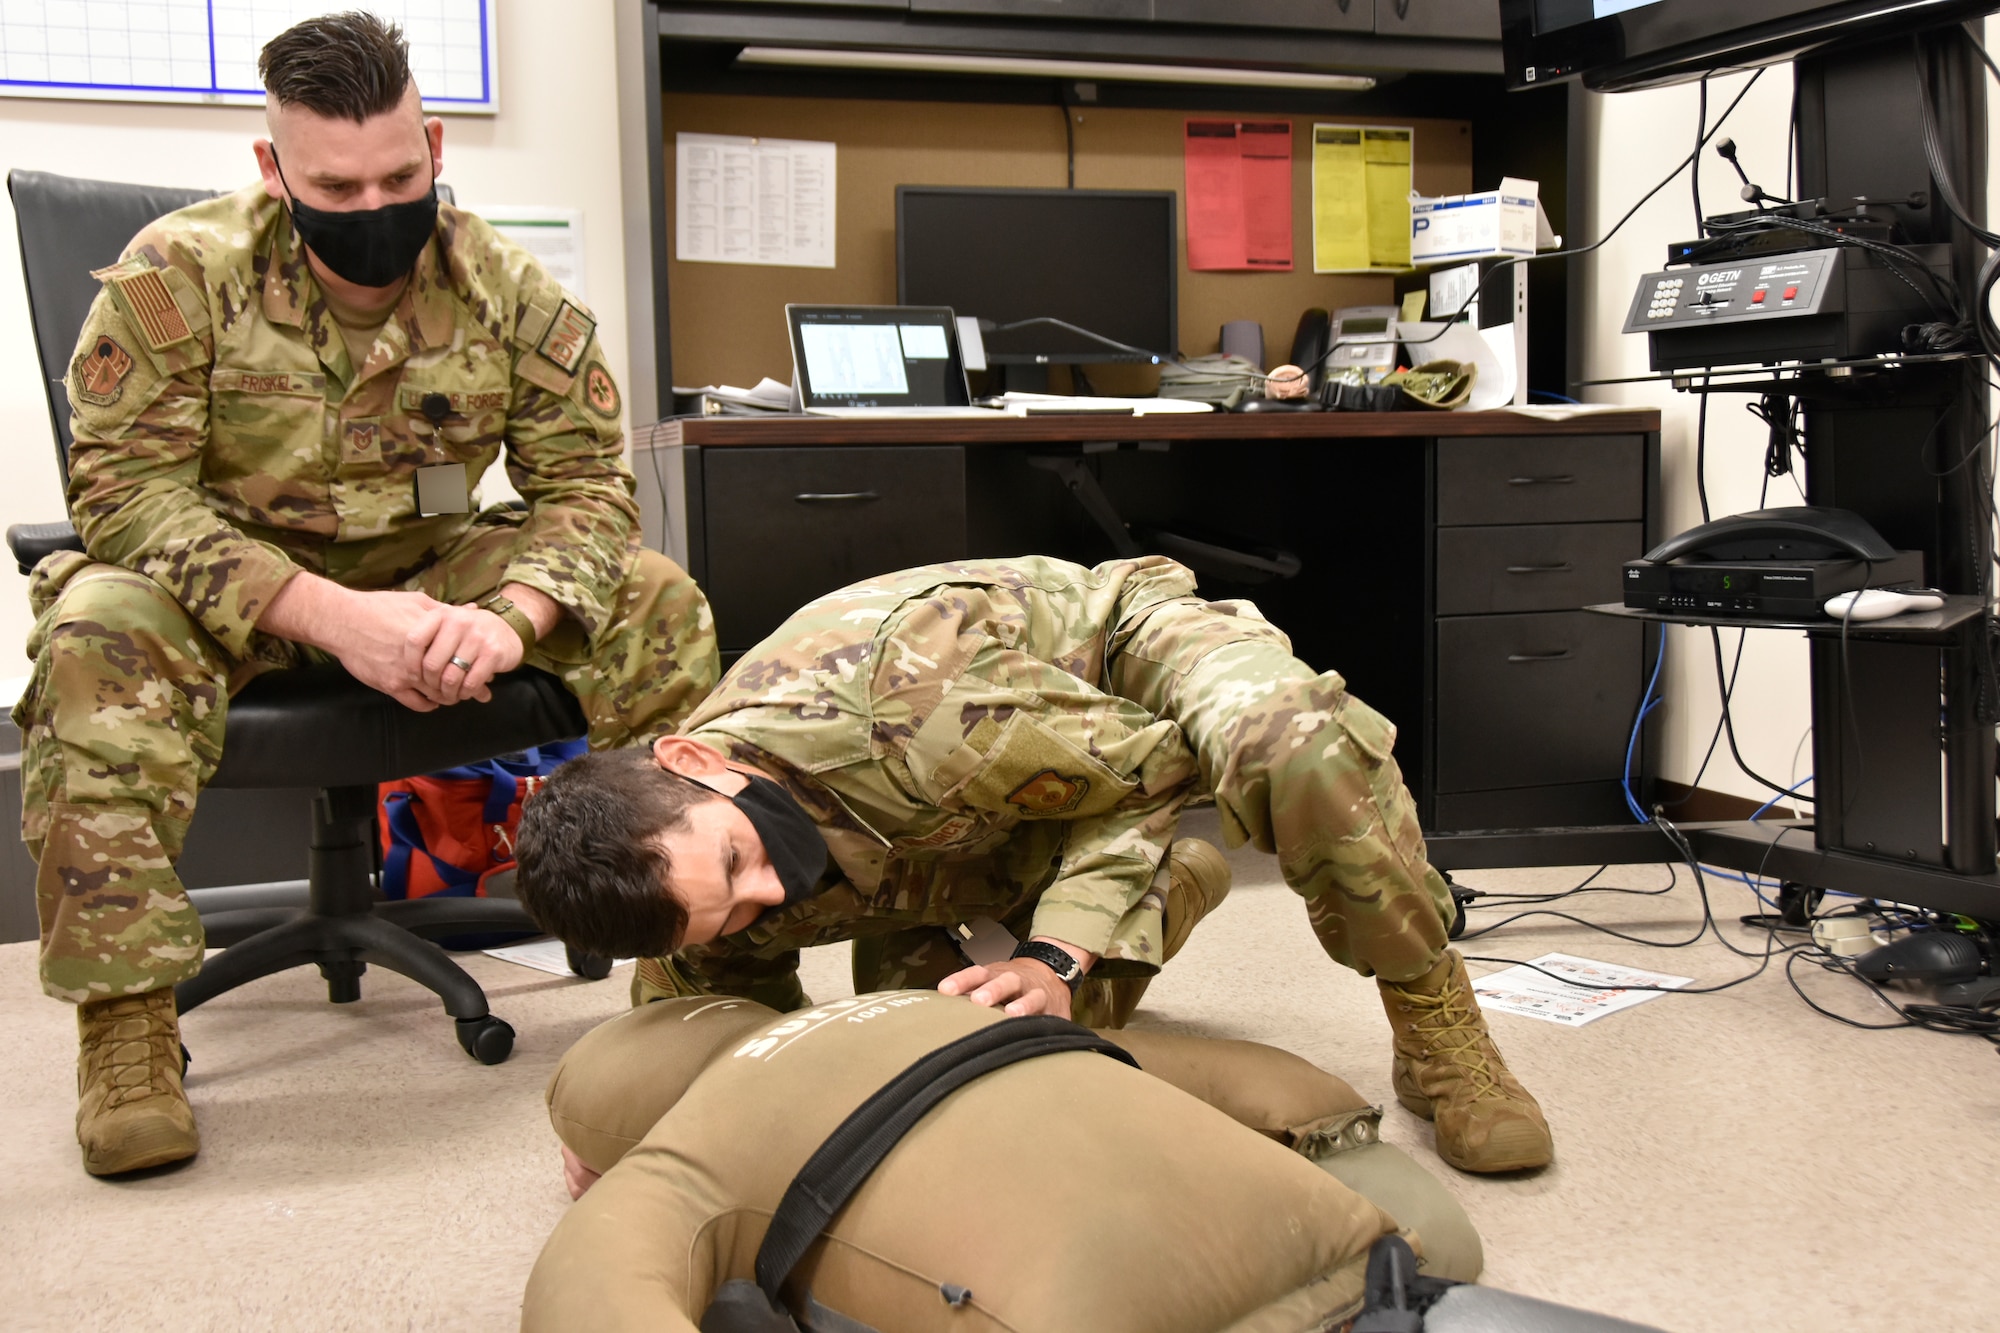 Tech. Sgt. Mark Friskel, an independent duty medical technician at Arnold Air Force Base, Tennessee, left, looks on as Maj. Justin Ong checks a simulated victim for breathing during Tactical Combat Casualty Care training Aug. 15, 2022, at the Arnold AFB Medical Aid Station. TCCC trainees are taught lifesaving techniques, strategies and procedures, allowing those who have been trained to provide best practice trauma care both on and off the battlefield. Ong was part of the first TCCC class, instructed by Friskel, at Arnold. The first level of TCCC training is required by all Department of Defense service members by April 2023. (U.S. Air Force photo by Bradley Hicks) (This image was altered by obscuring badges for security purposes)